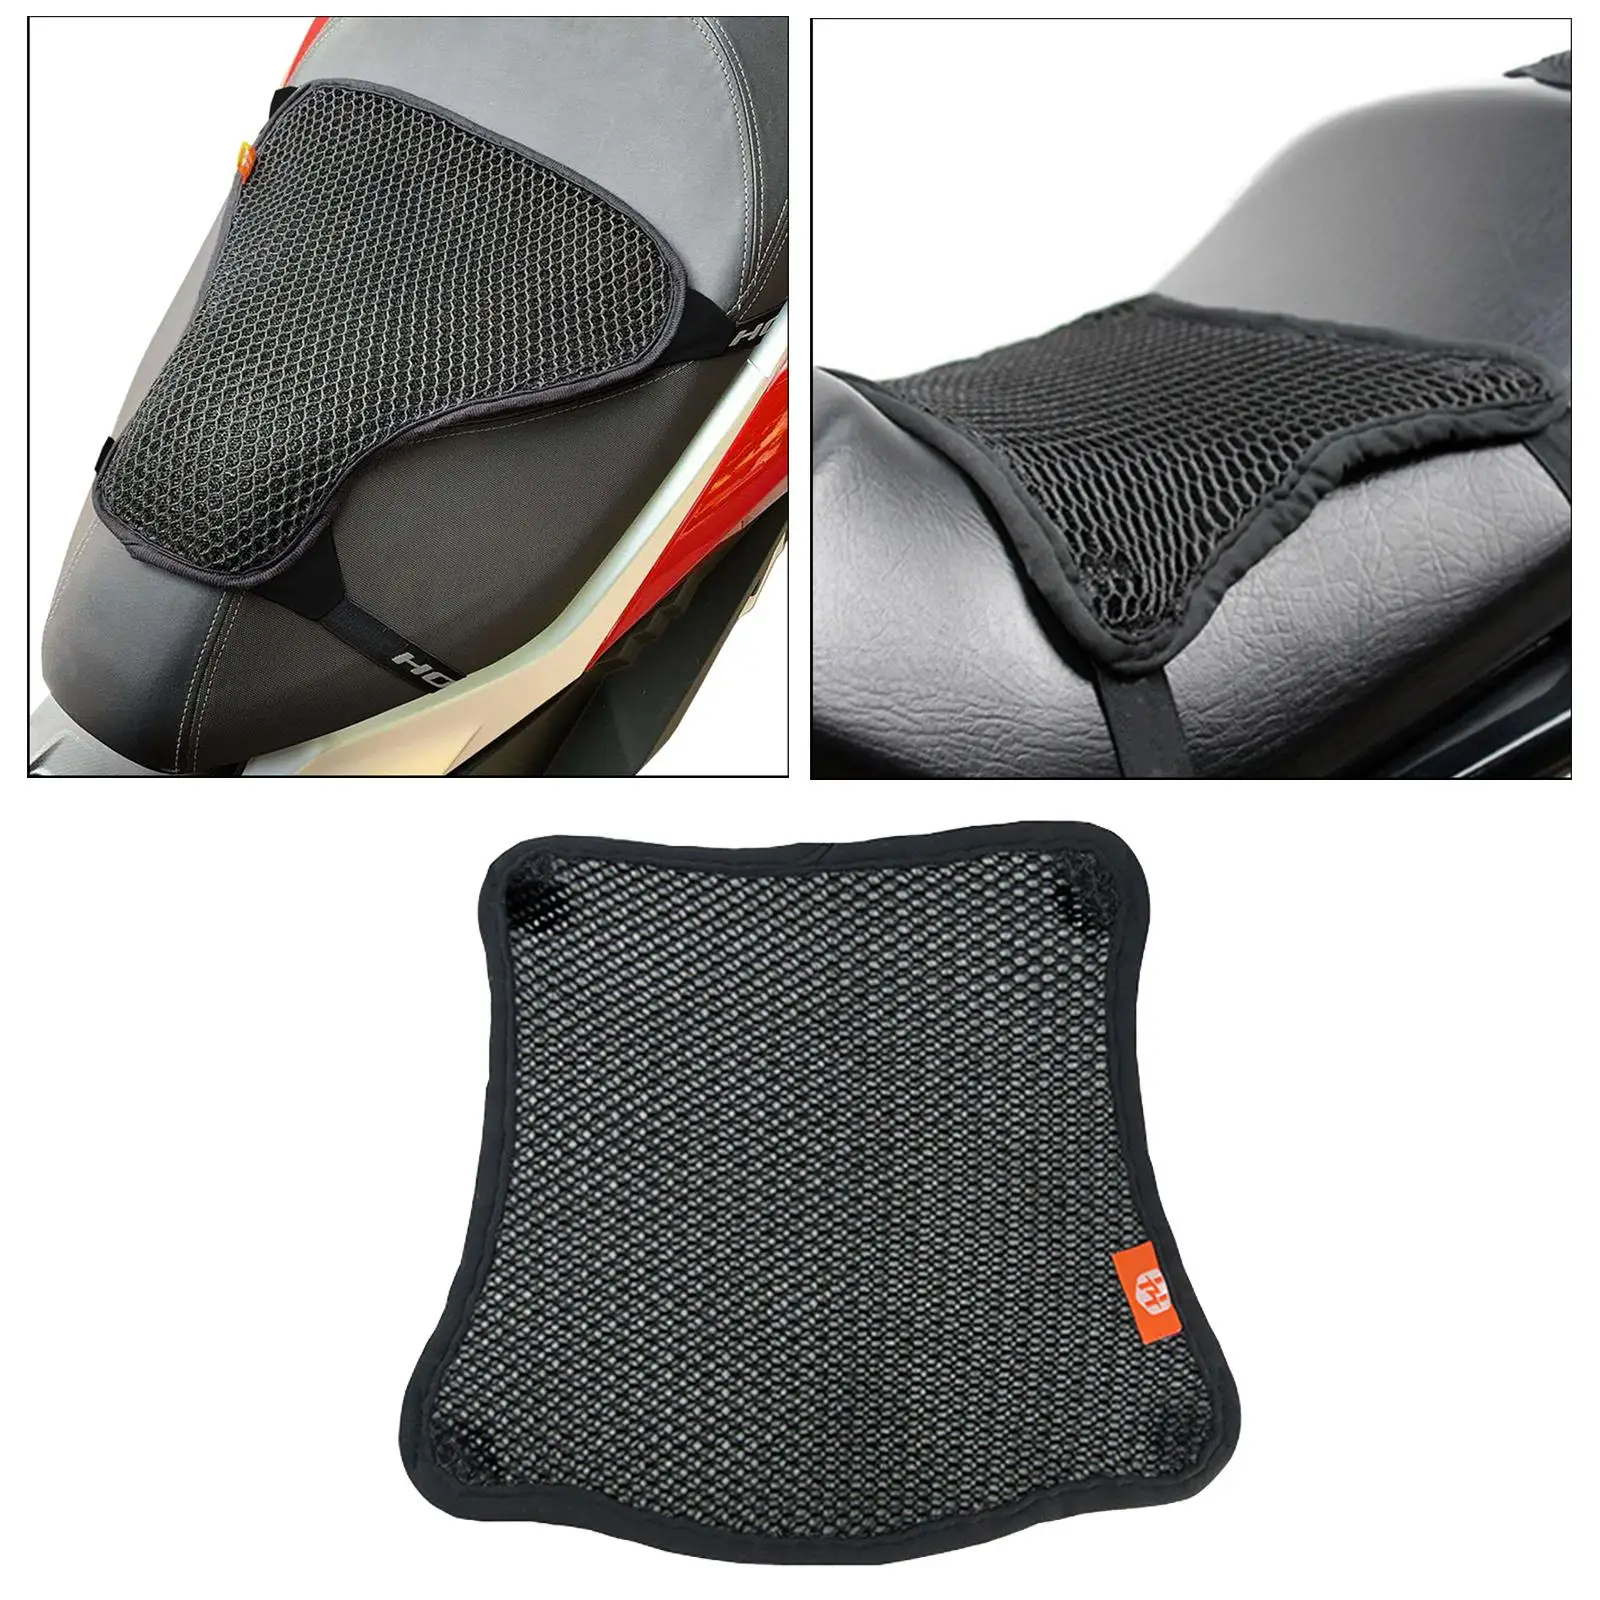 Summer Motorcycle Seat Cushion Protector Reduces Pressure and Fatigue